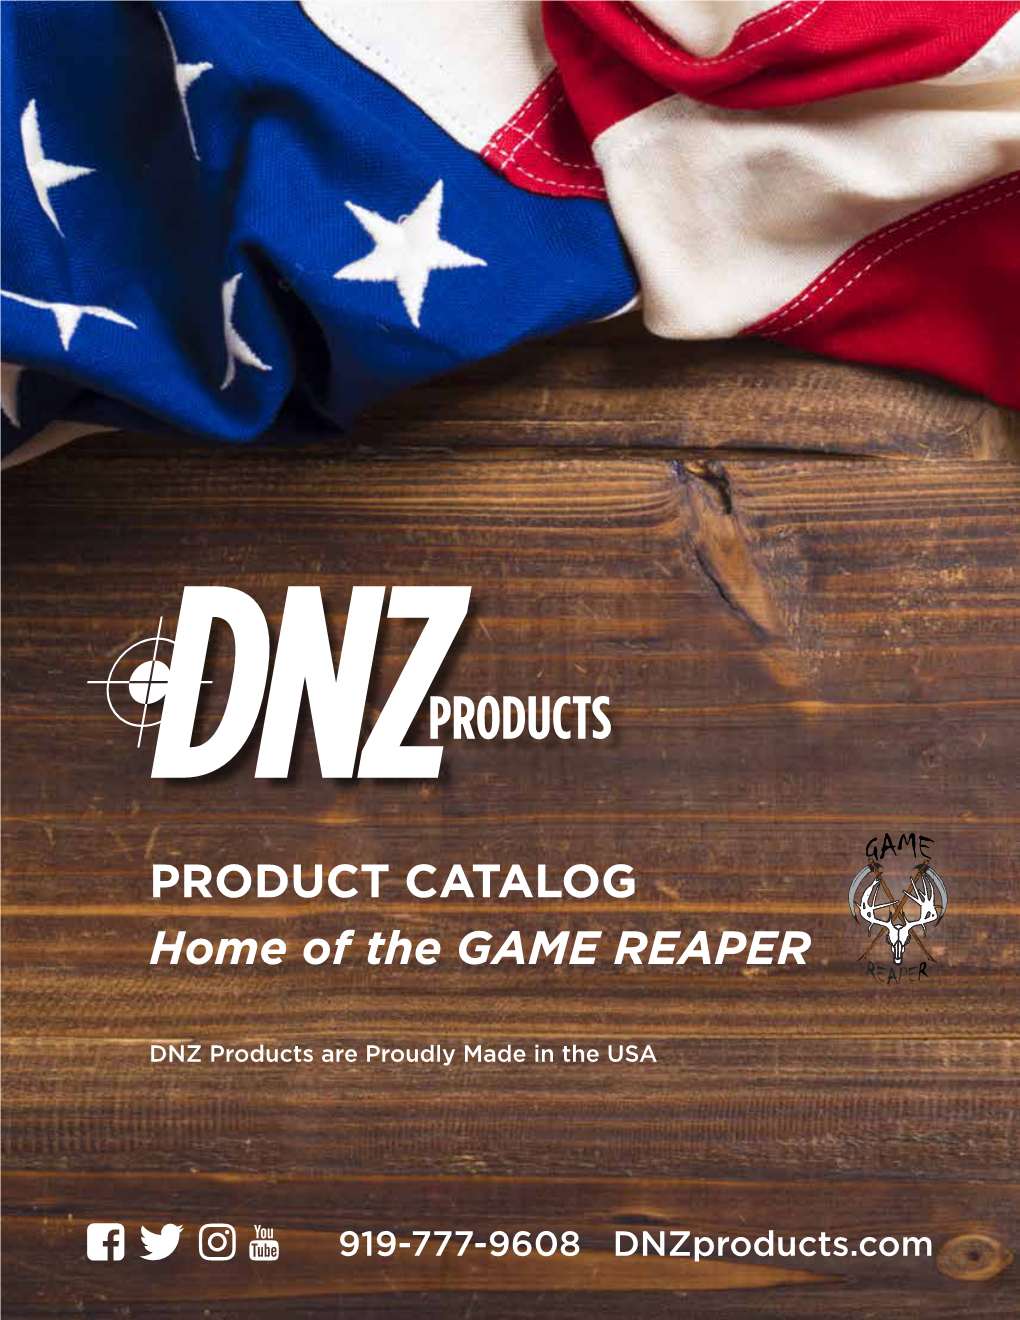 PRODUCT CATALOG Home of the GAME REAPER